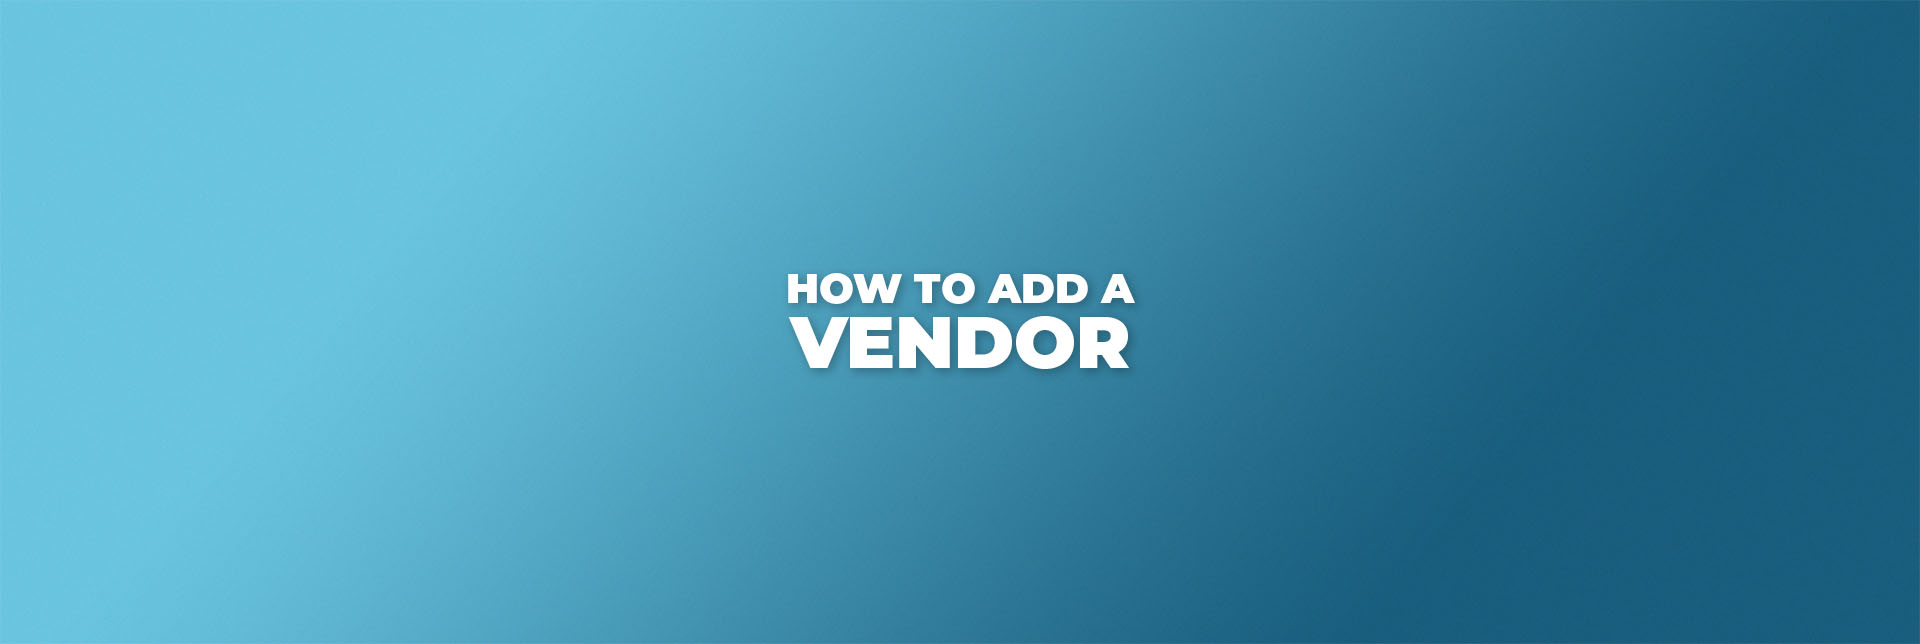 How to Add a Vendor in Shopify